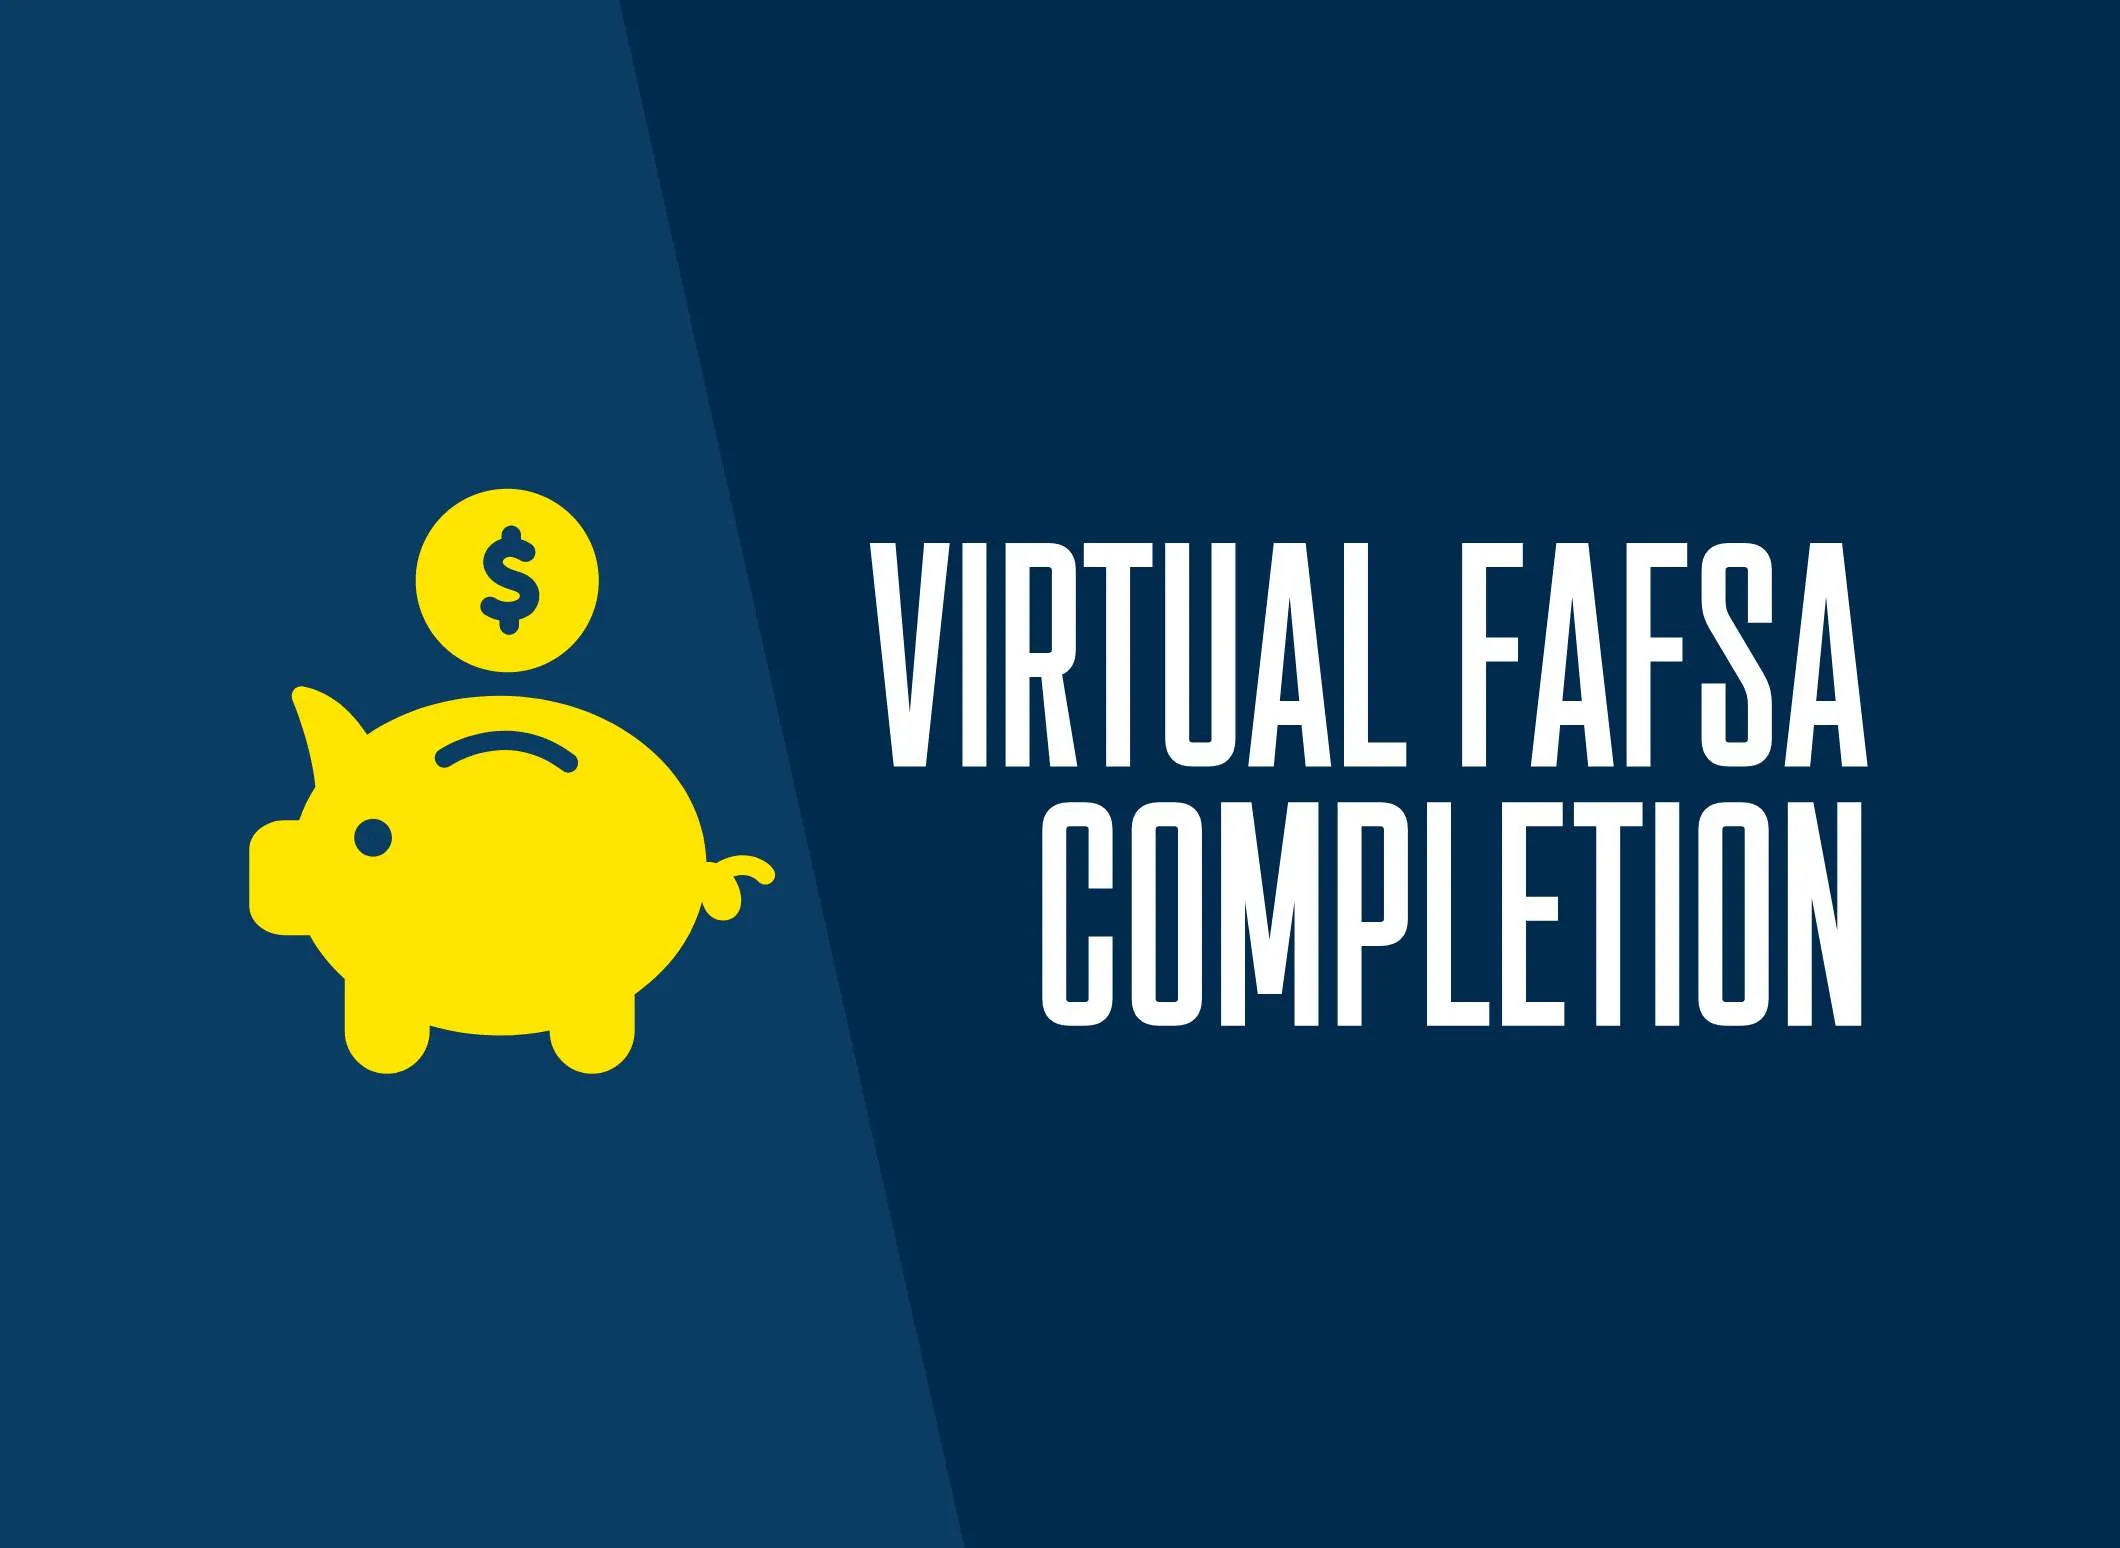 Virtual FAFSA Completion event graphic with piggy bank